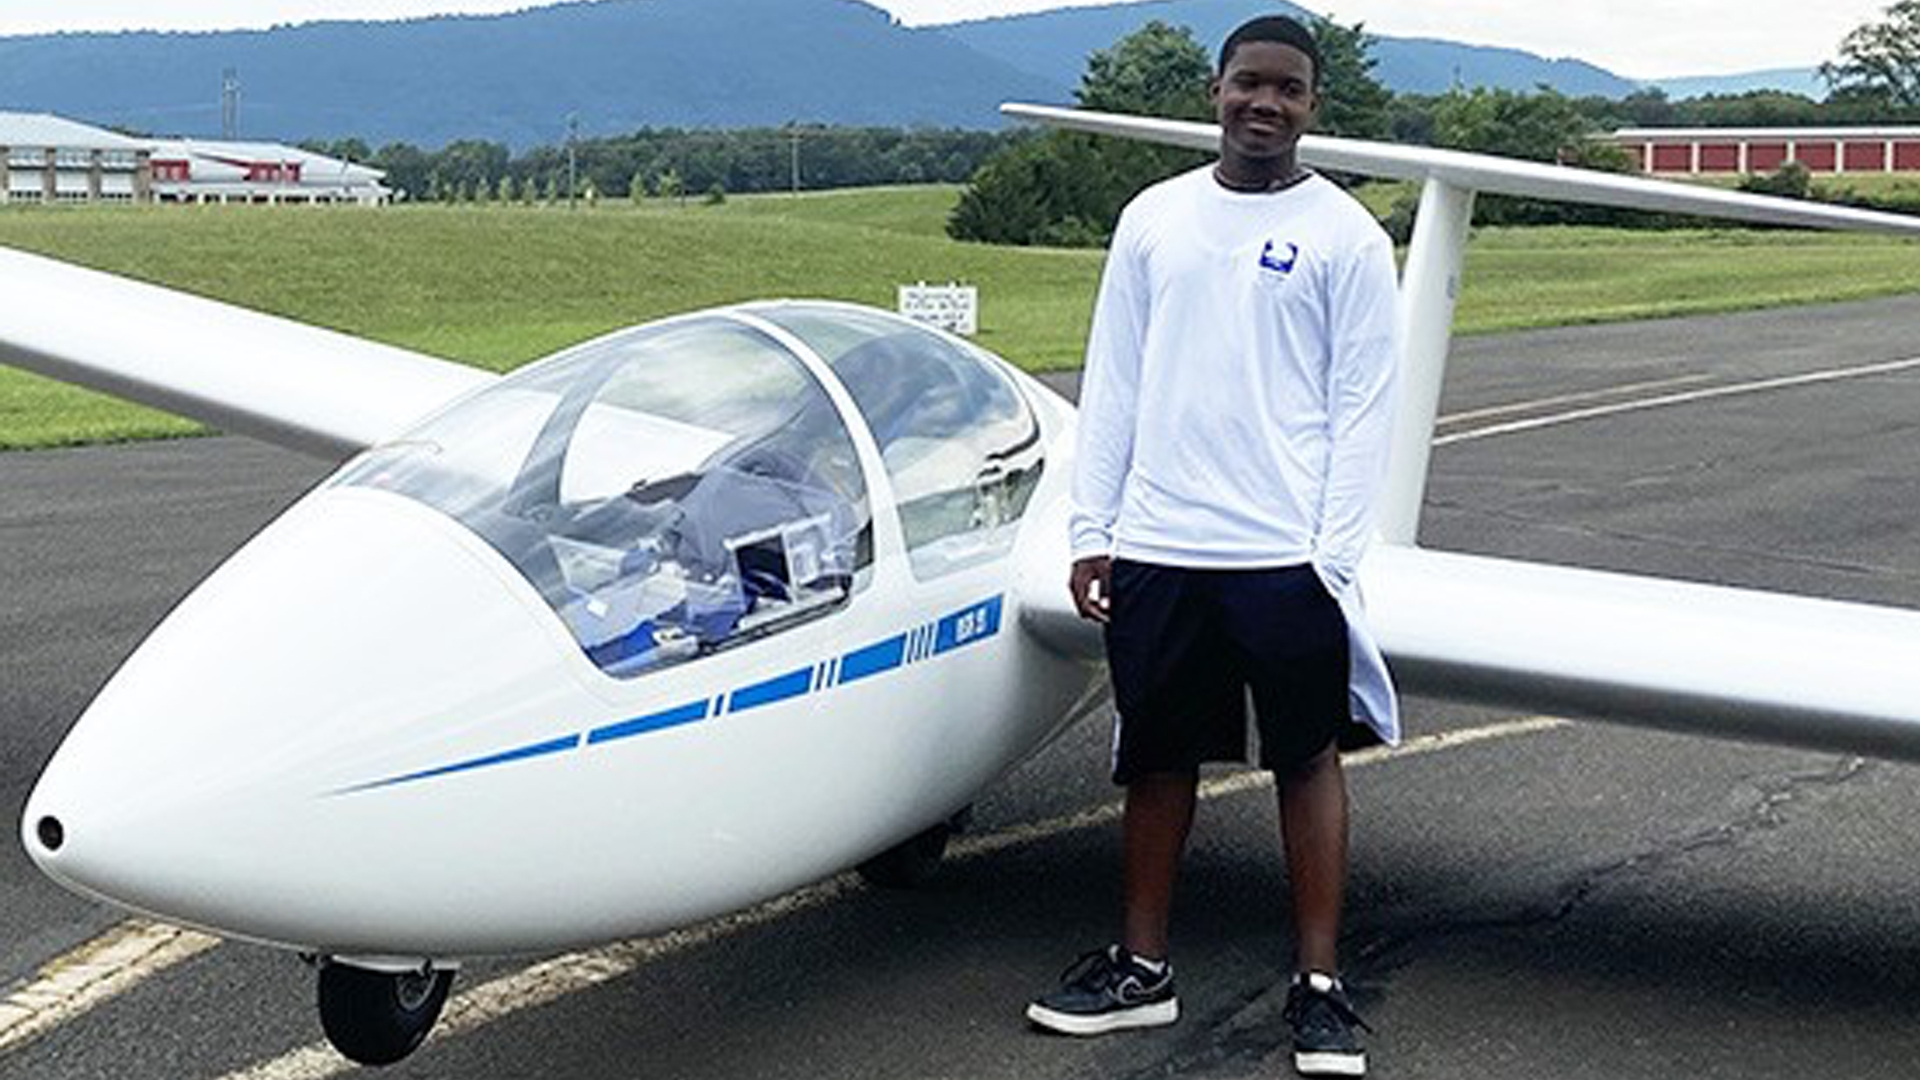 Caleb Smith Makes History As The Nation's Youngest Glider Pilot At Age 16